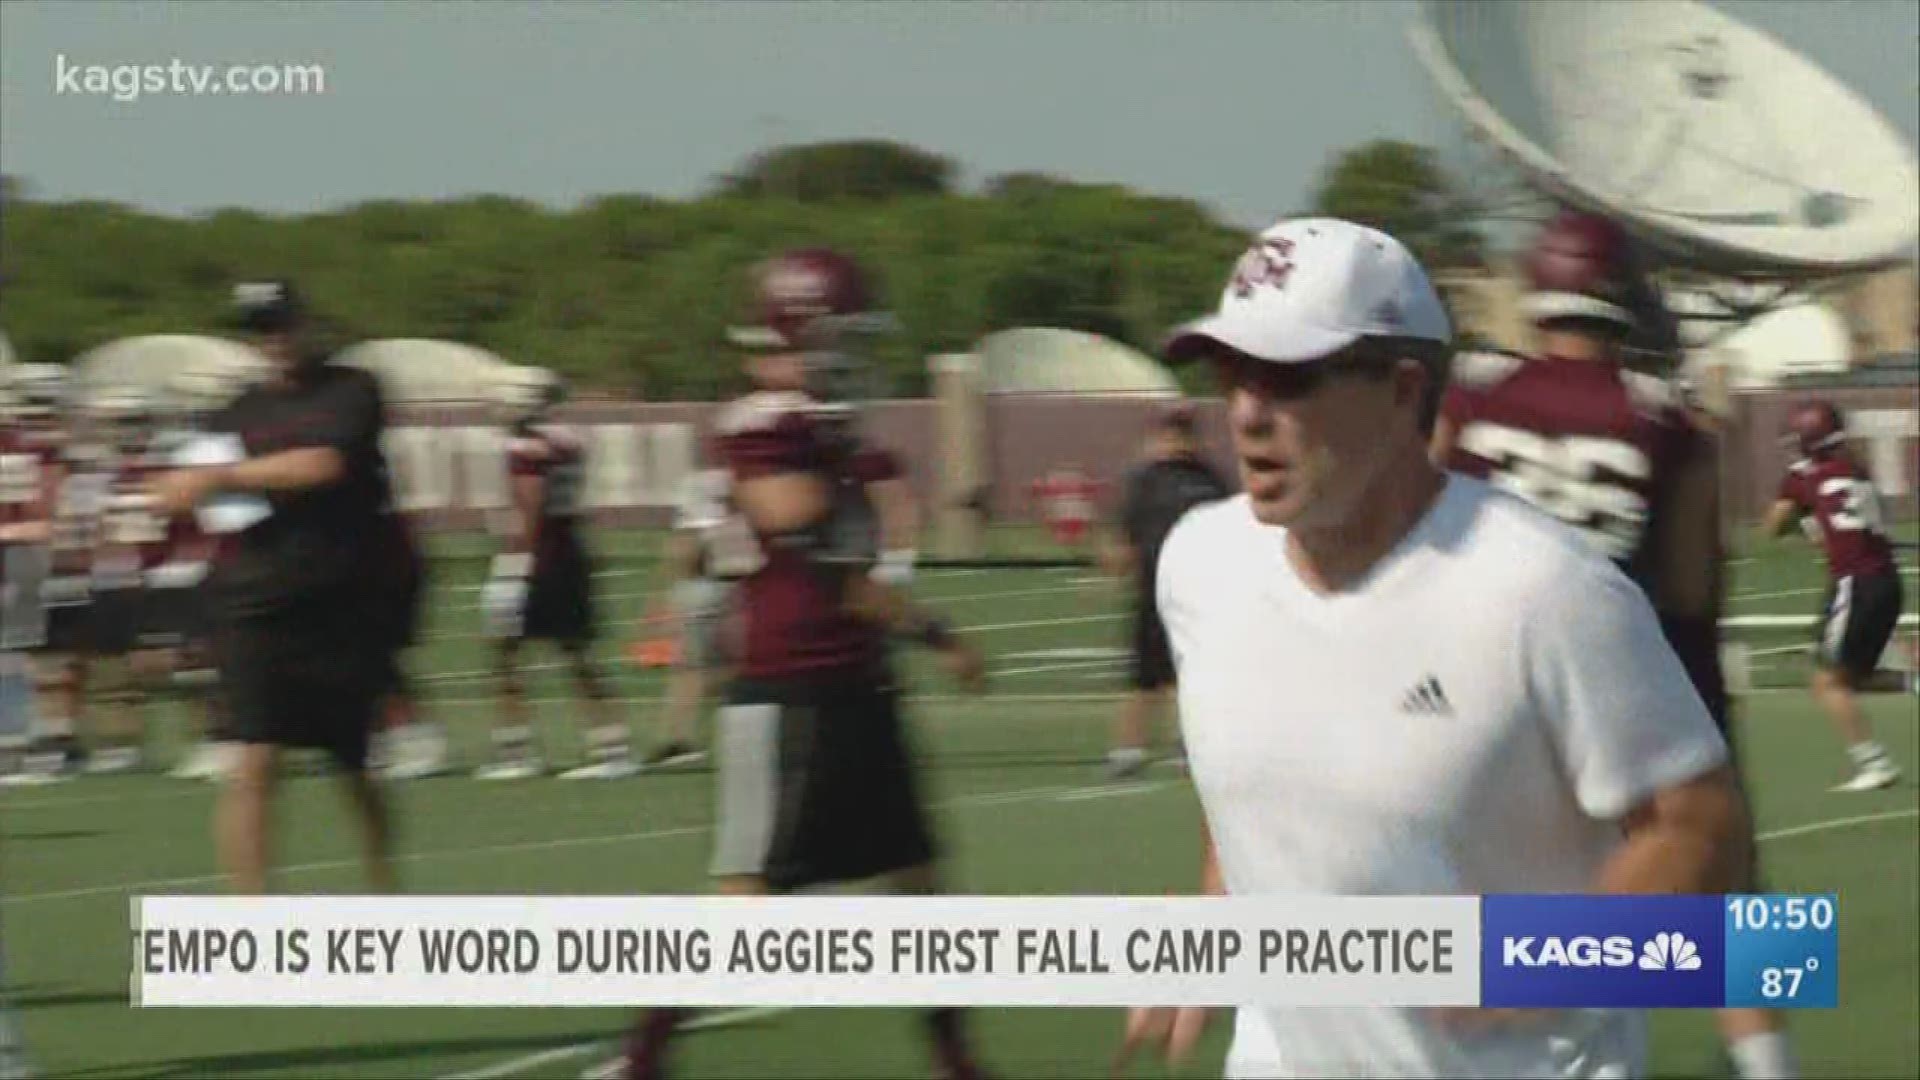 The Aggies opened fall camp on Thursday night with their first practice.